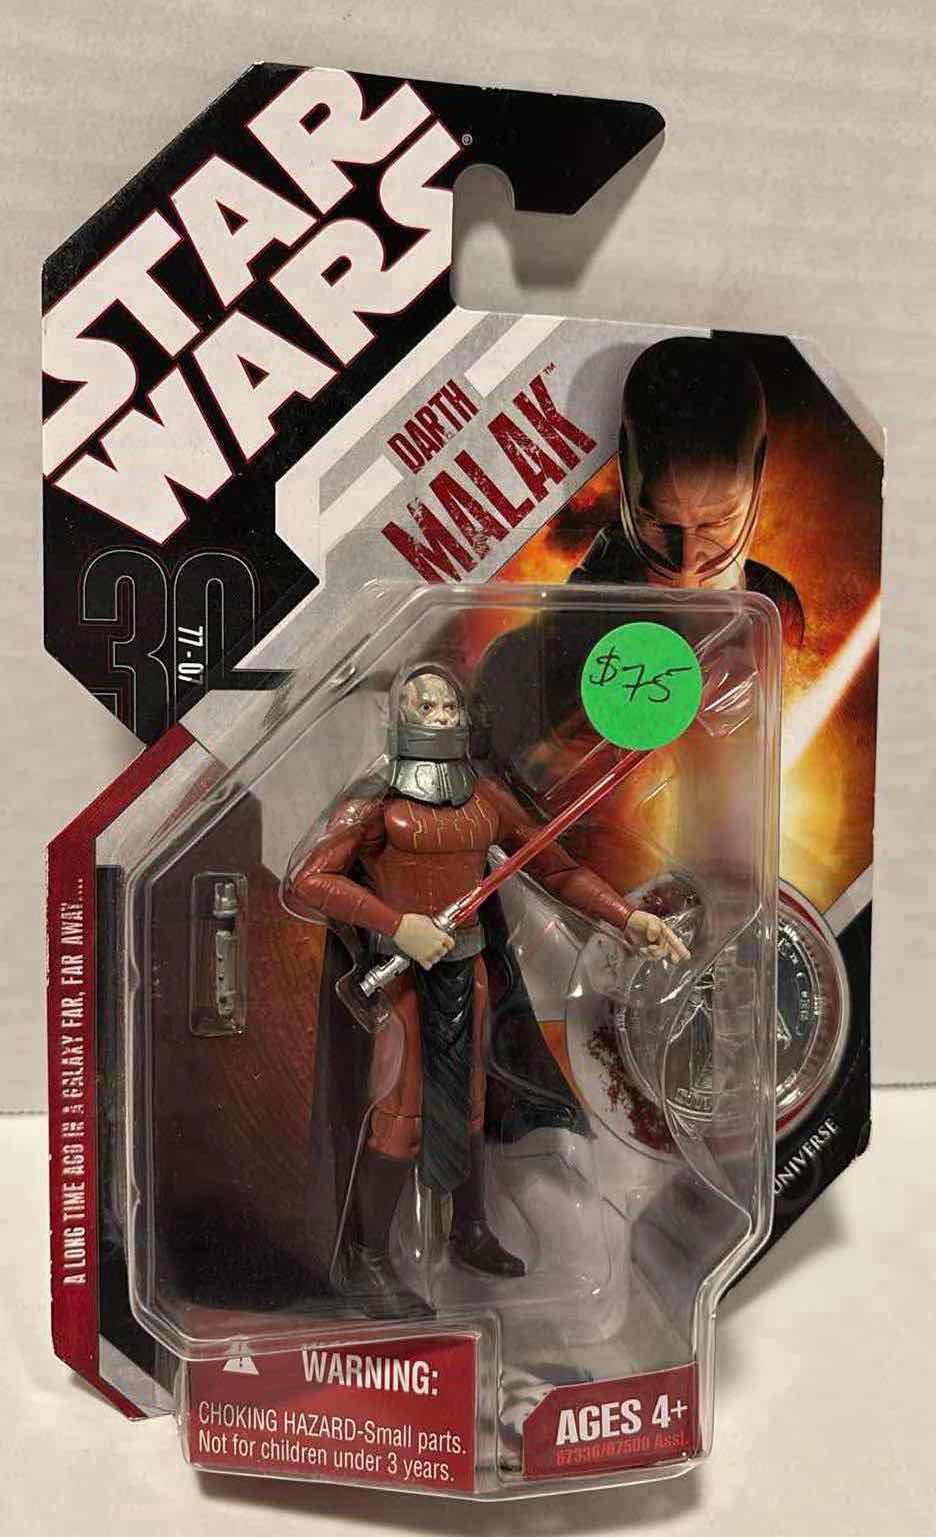 Photo 1 of NEW 2007 HASBRO STAR WARS 30TH ANNIVERSARY EXPANDED UNIVERSE FIGURE & ACCESSORIES “DARTH MALAK” W EXCLUSIVE COLLECTOR COIN